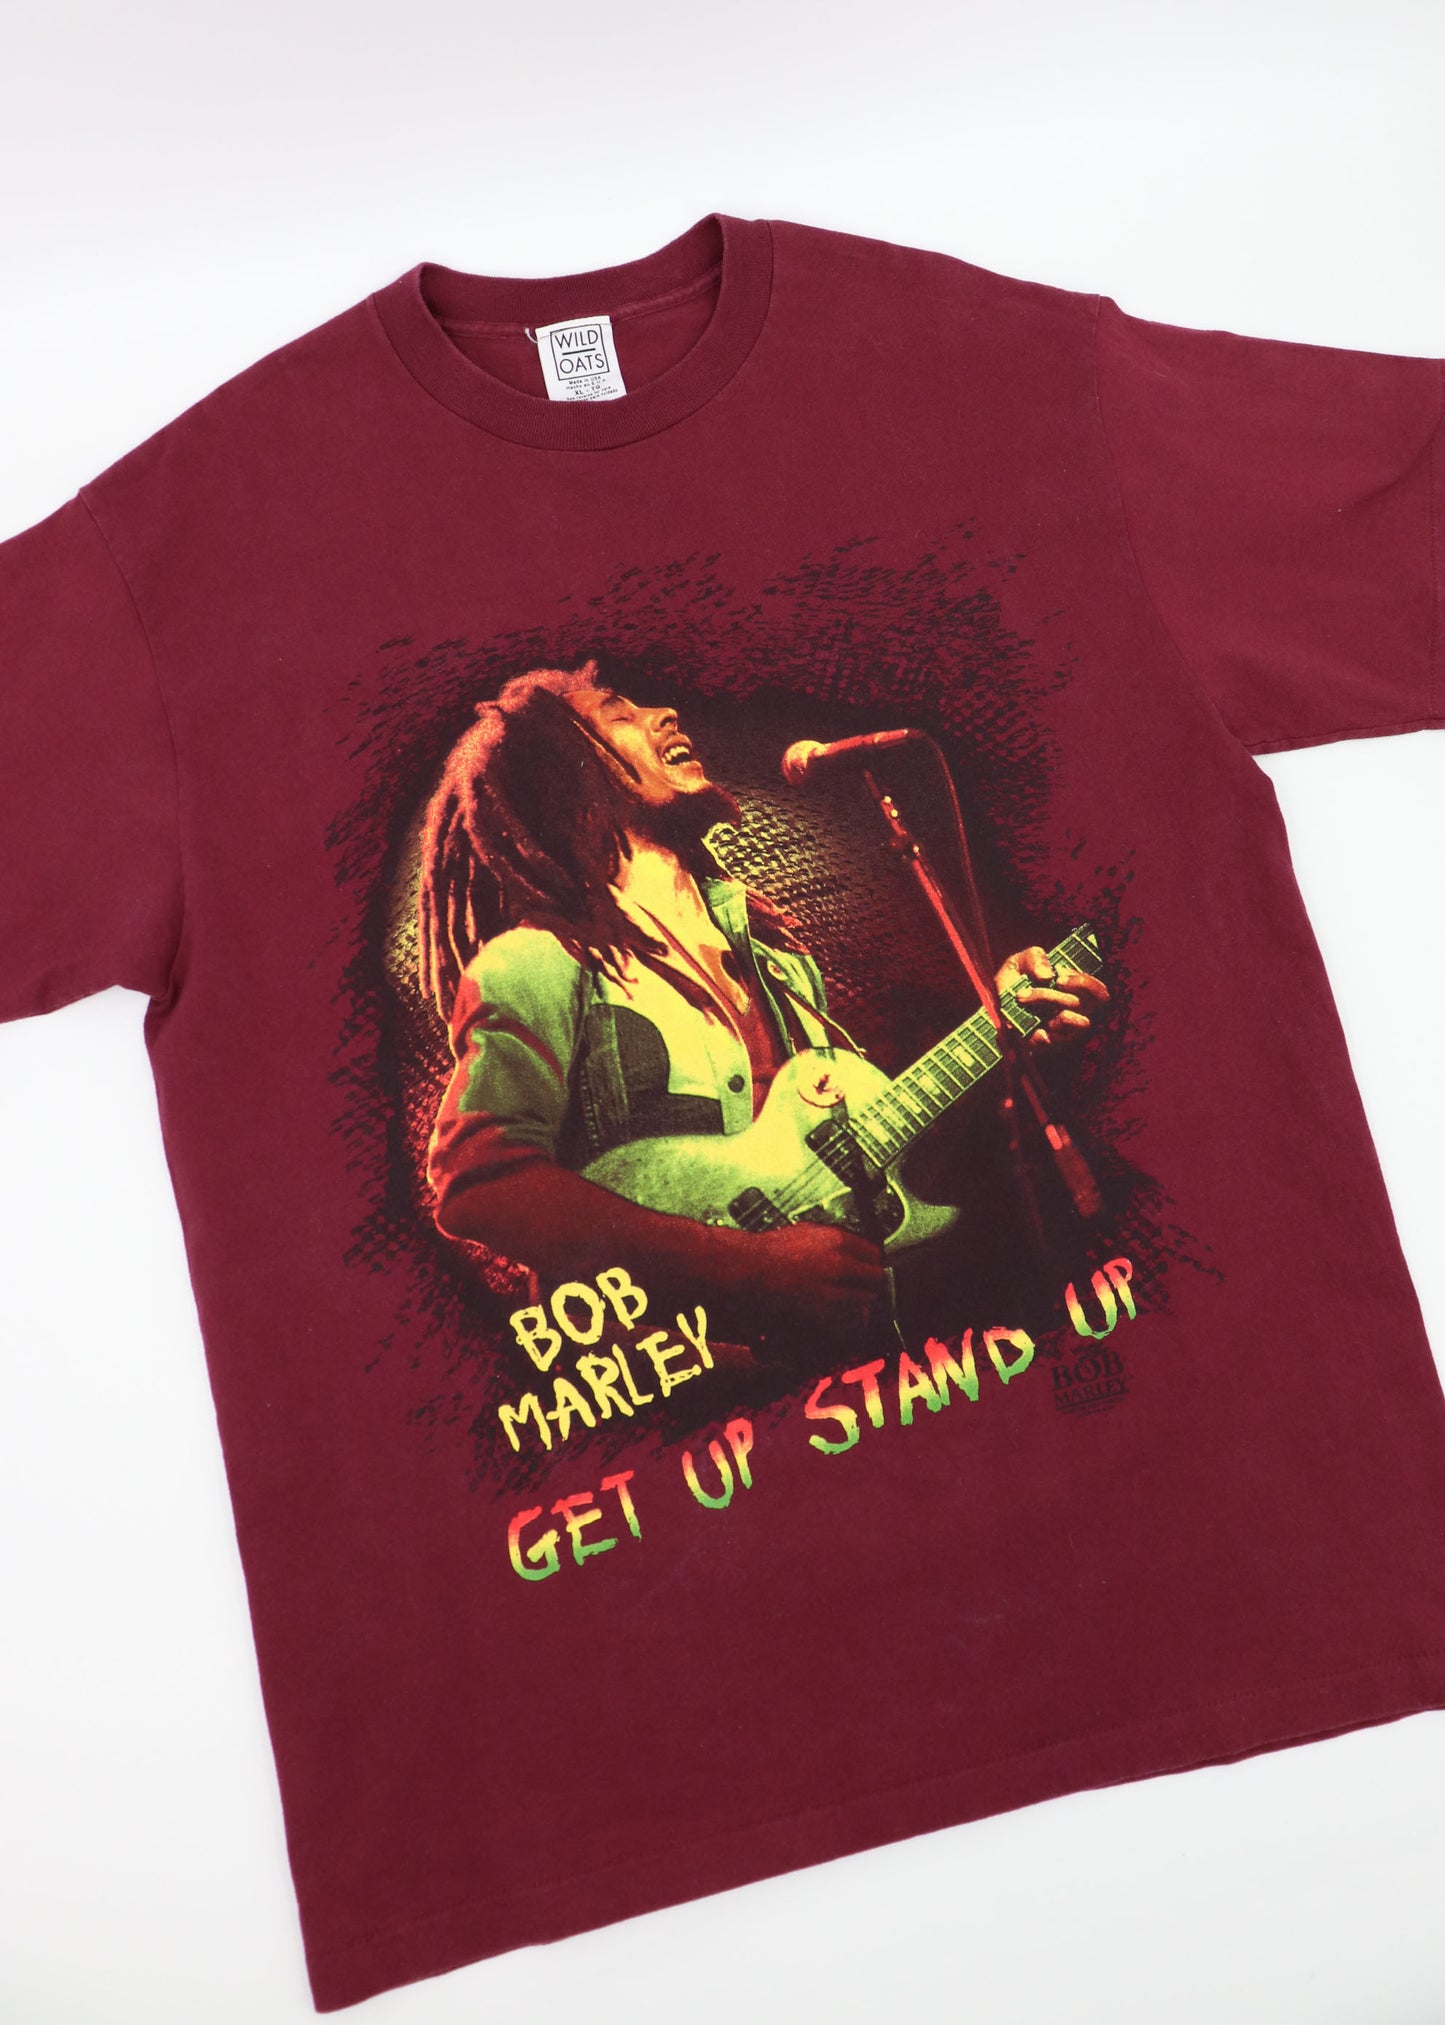 BOB MARLEY GET UP STAND UP 1993 MADE IN USA